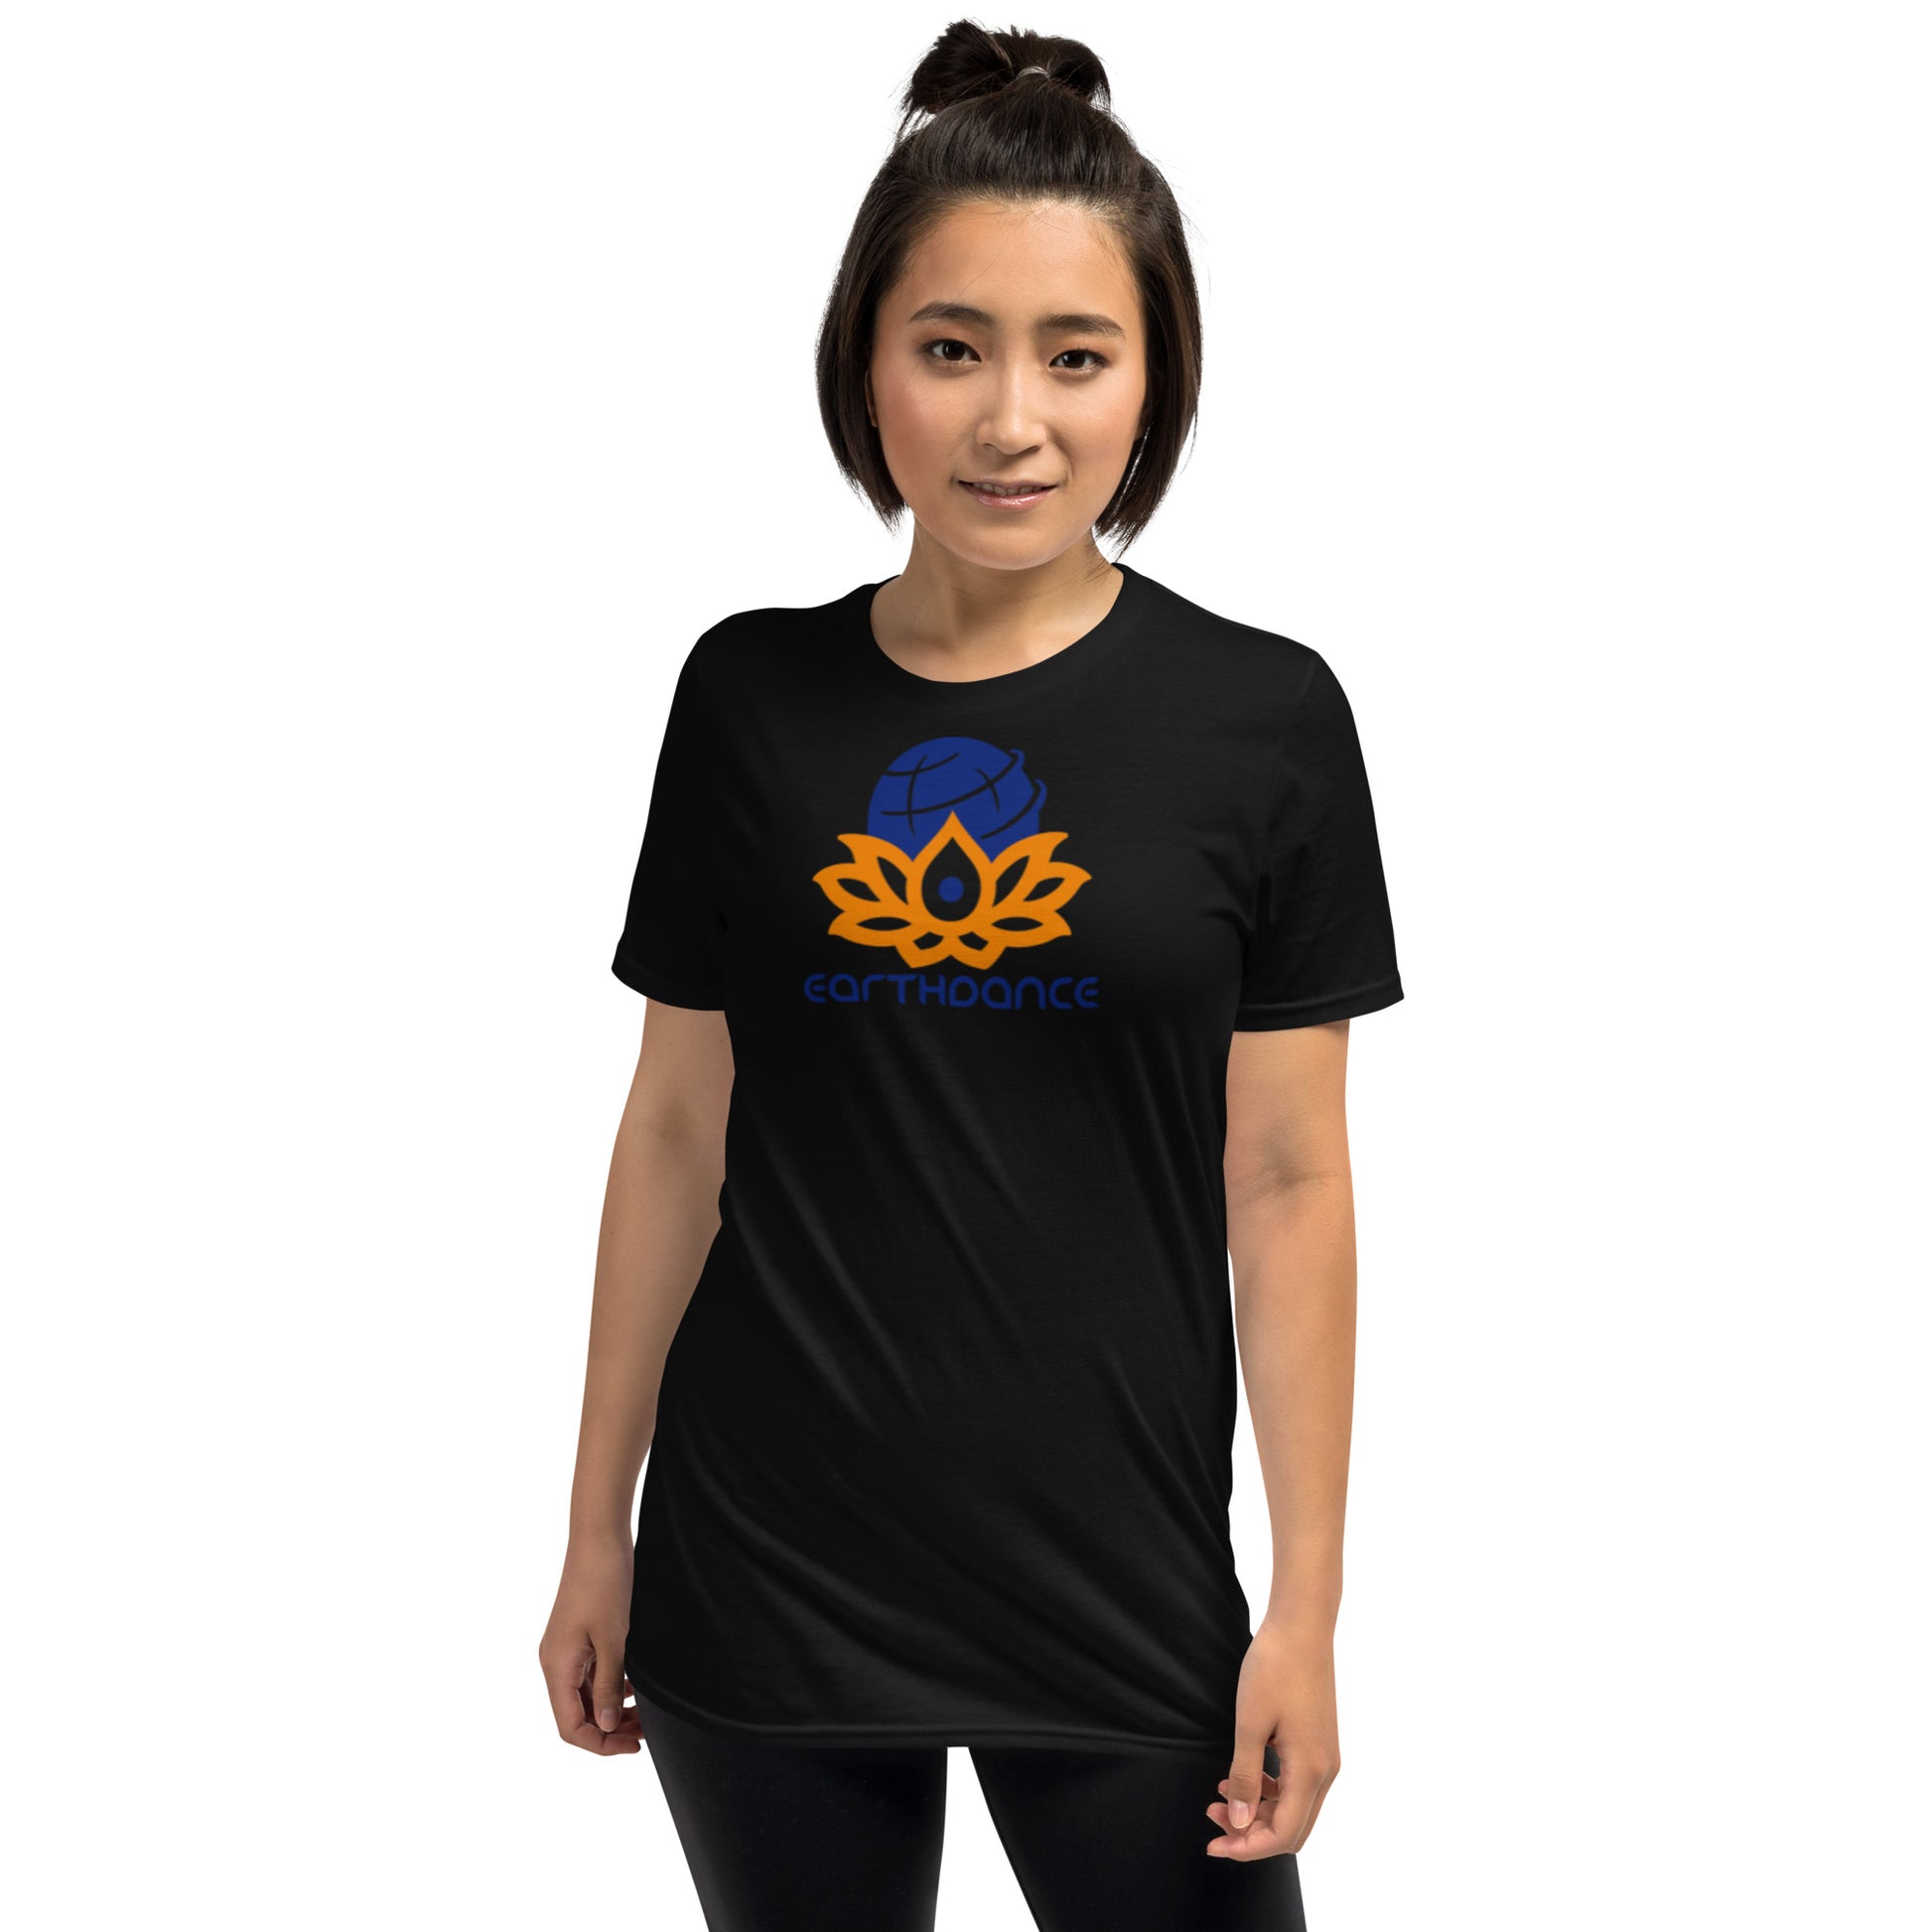 Earthdance 2023 - Amber Leigh v2 - Limited Edition - Short-Sleeve Unisex T-Shirt - The Foundation of Families